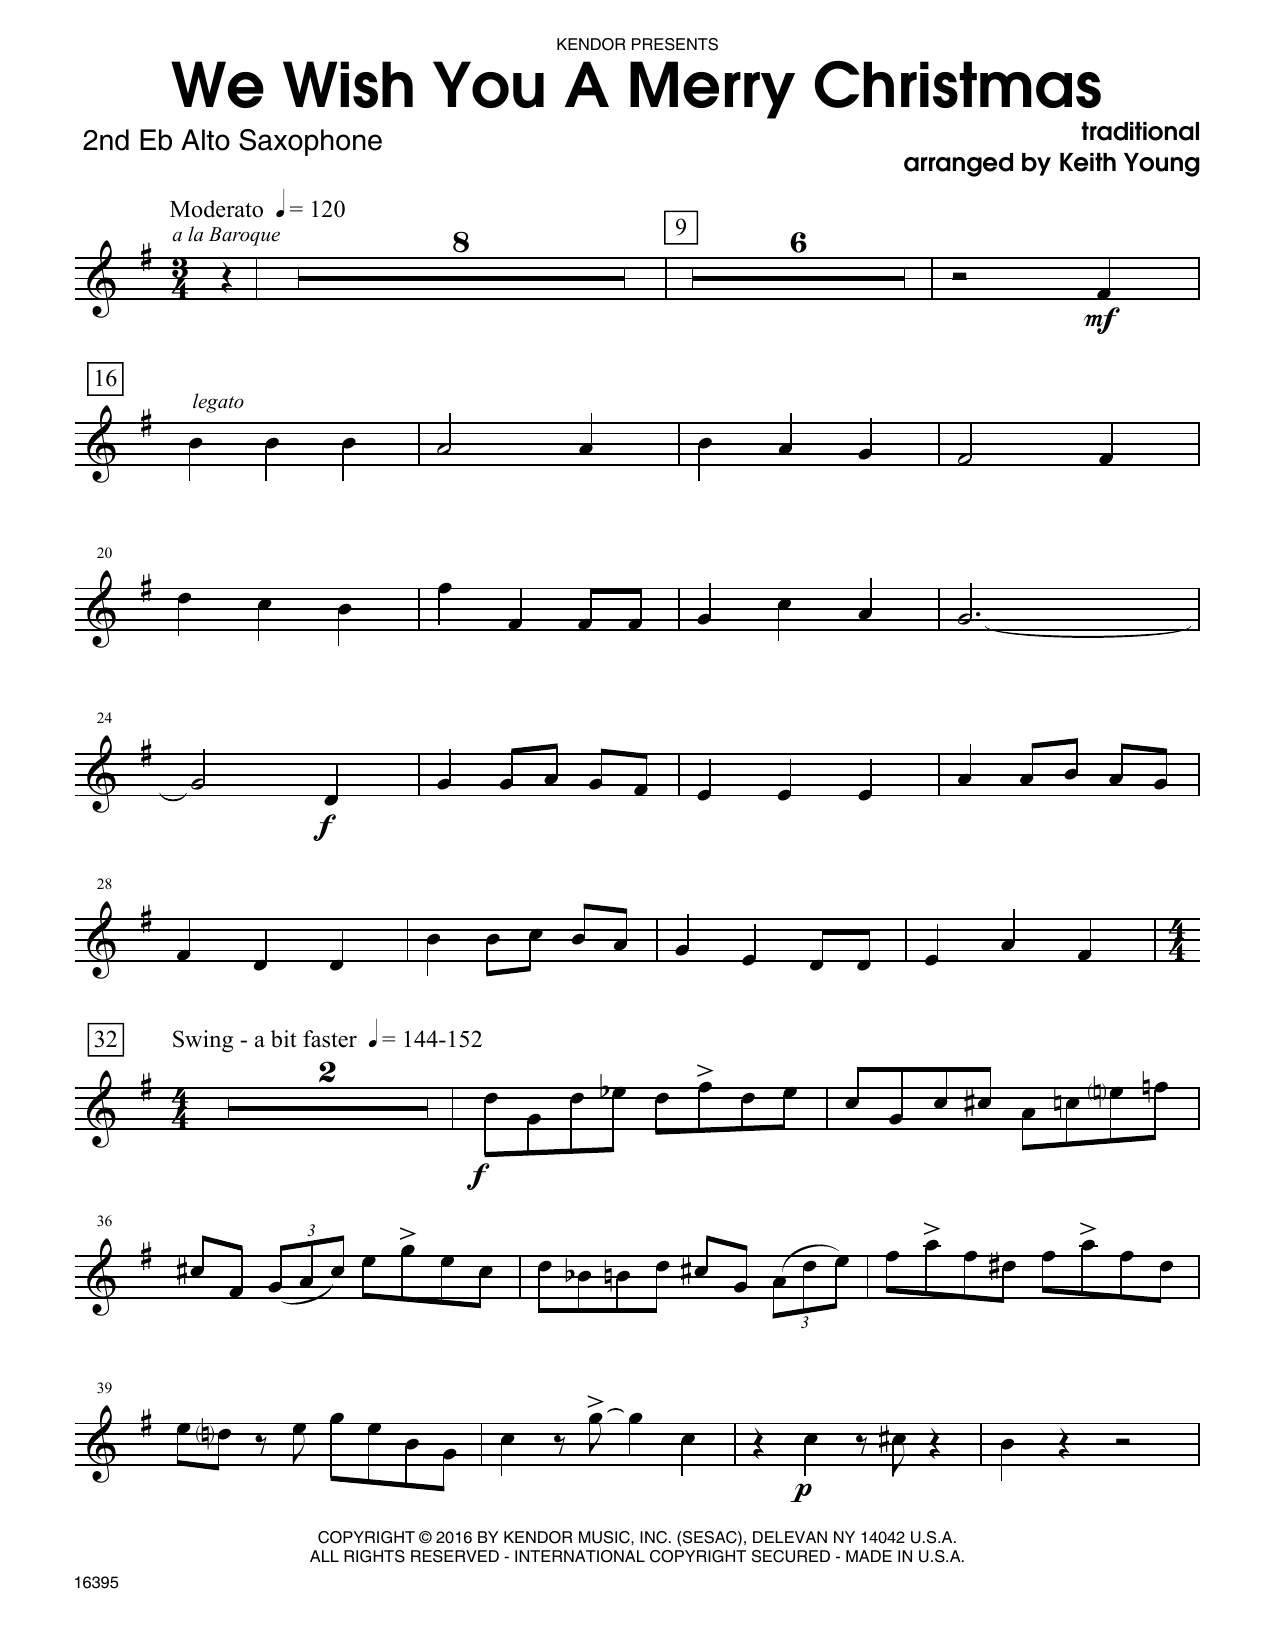 Download Keith Young We Wish You A Merry Christmas - 2nd Eb Sheet Music